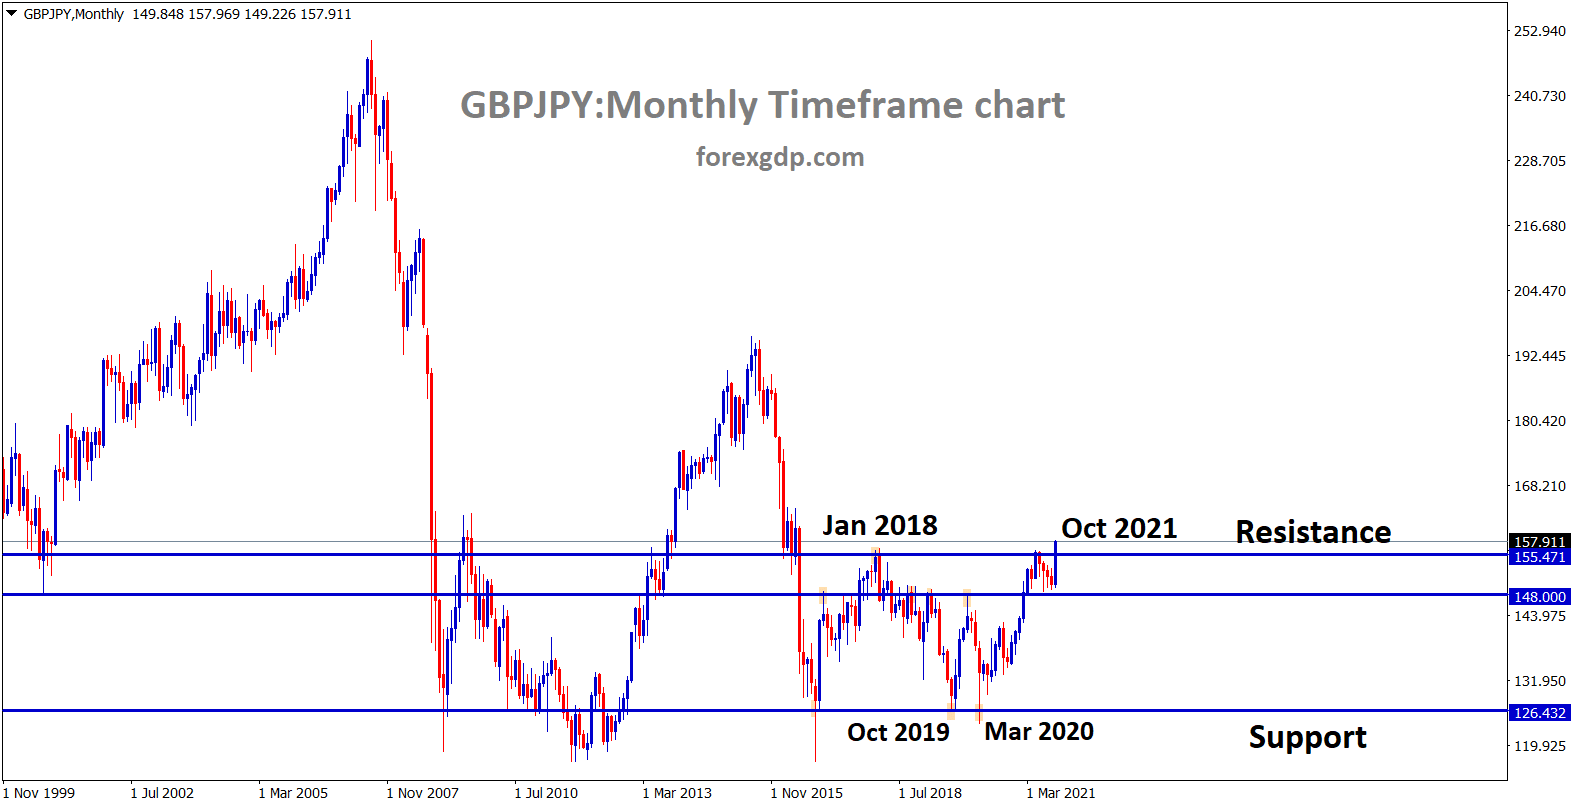 GBPJPY is trying to break the horizontal resistance in the higher timeframe chart